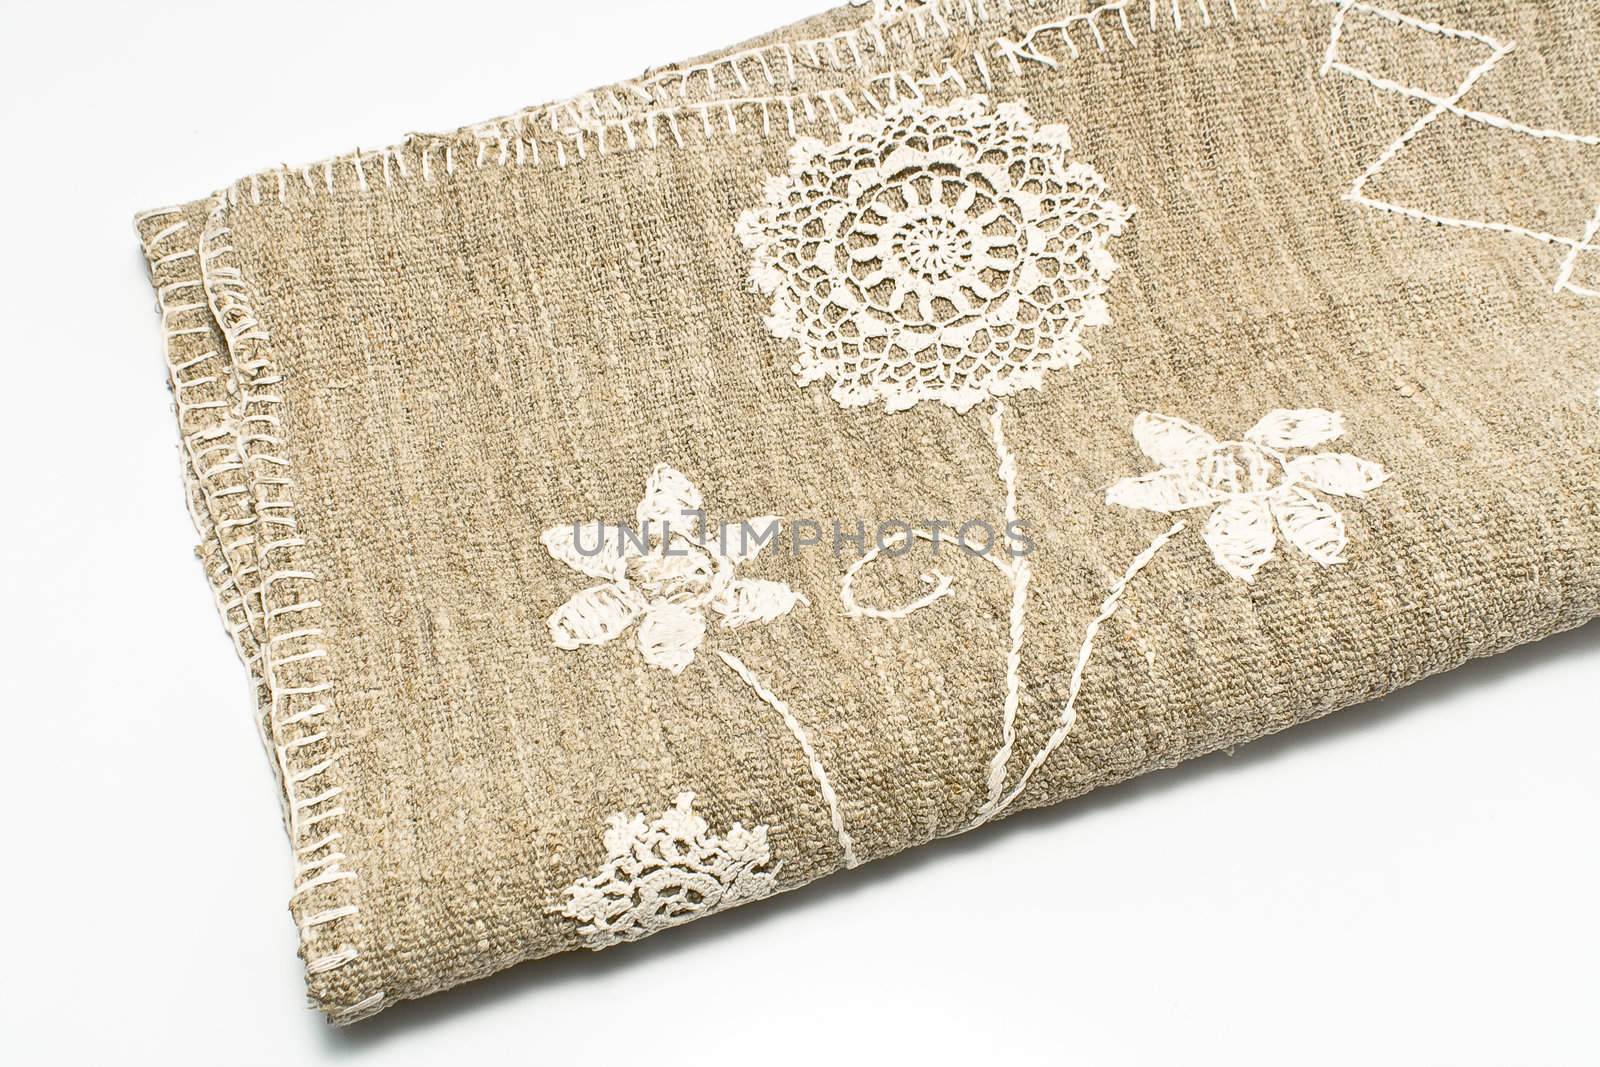 Natural rustic linen with lace by gavran333